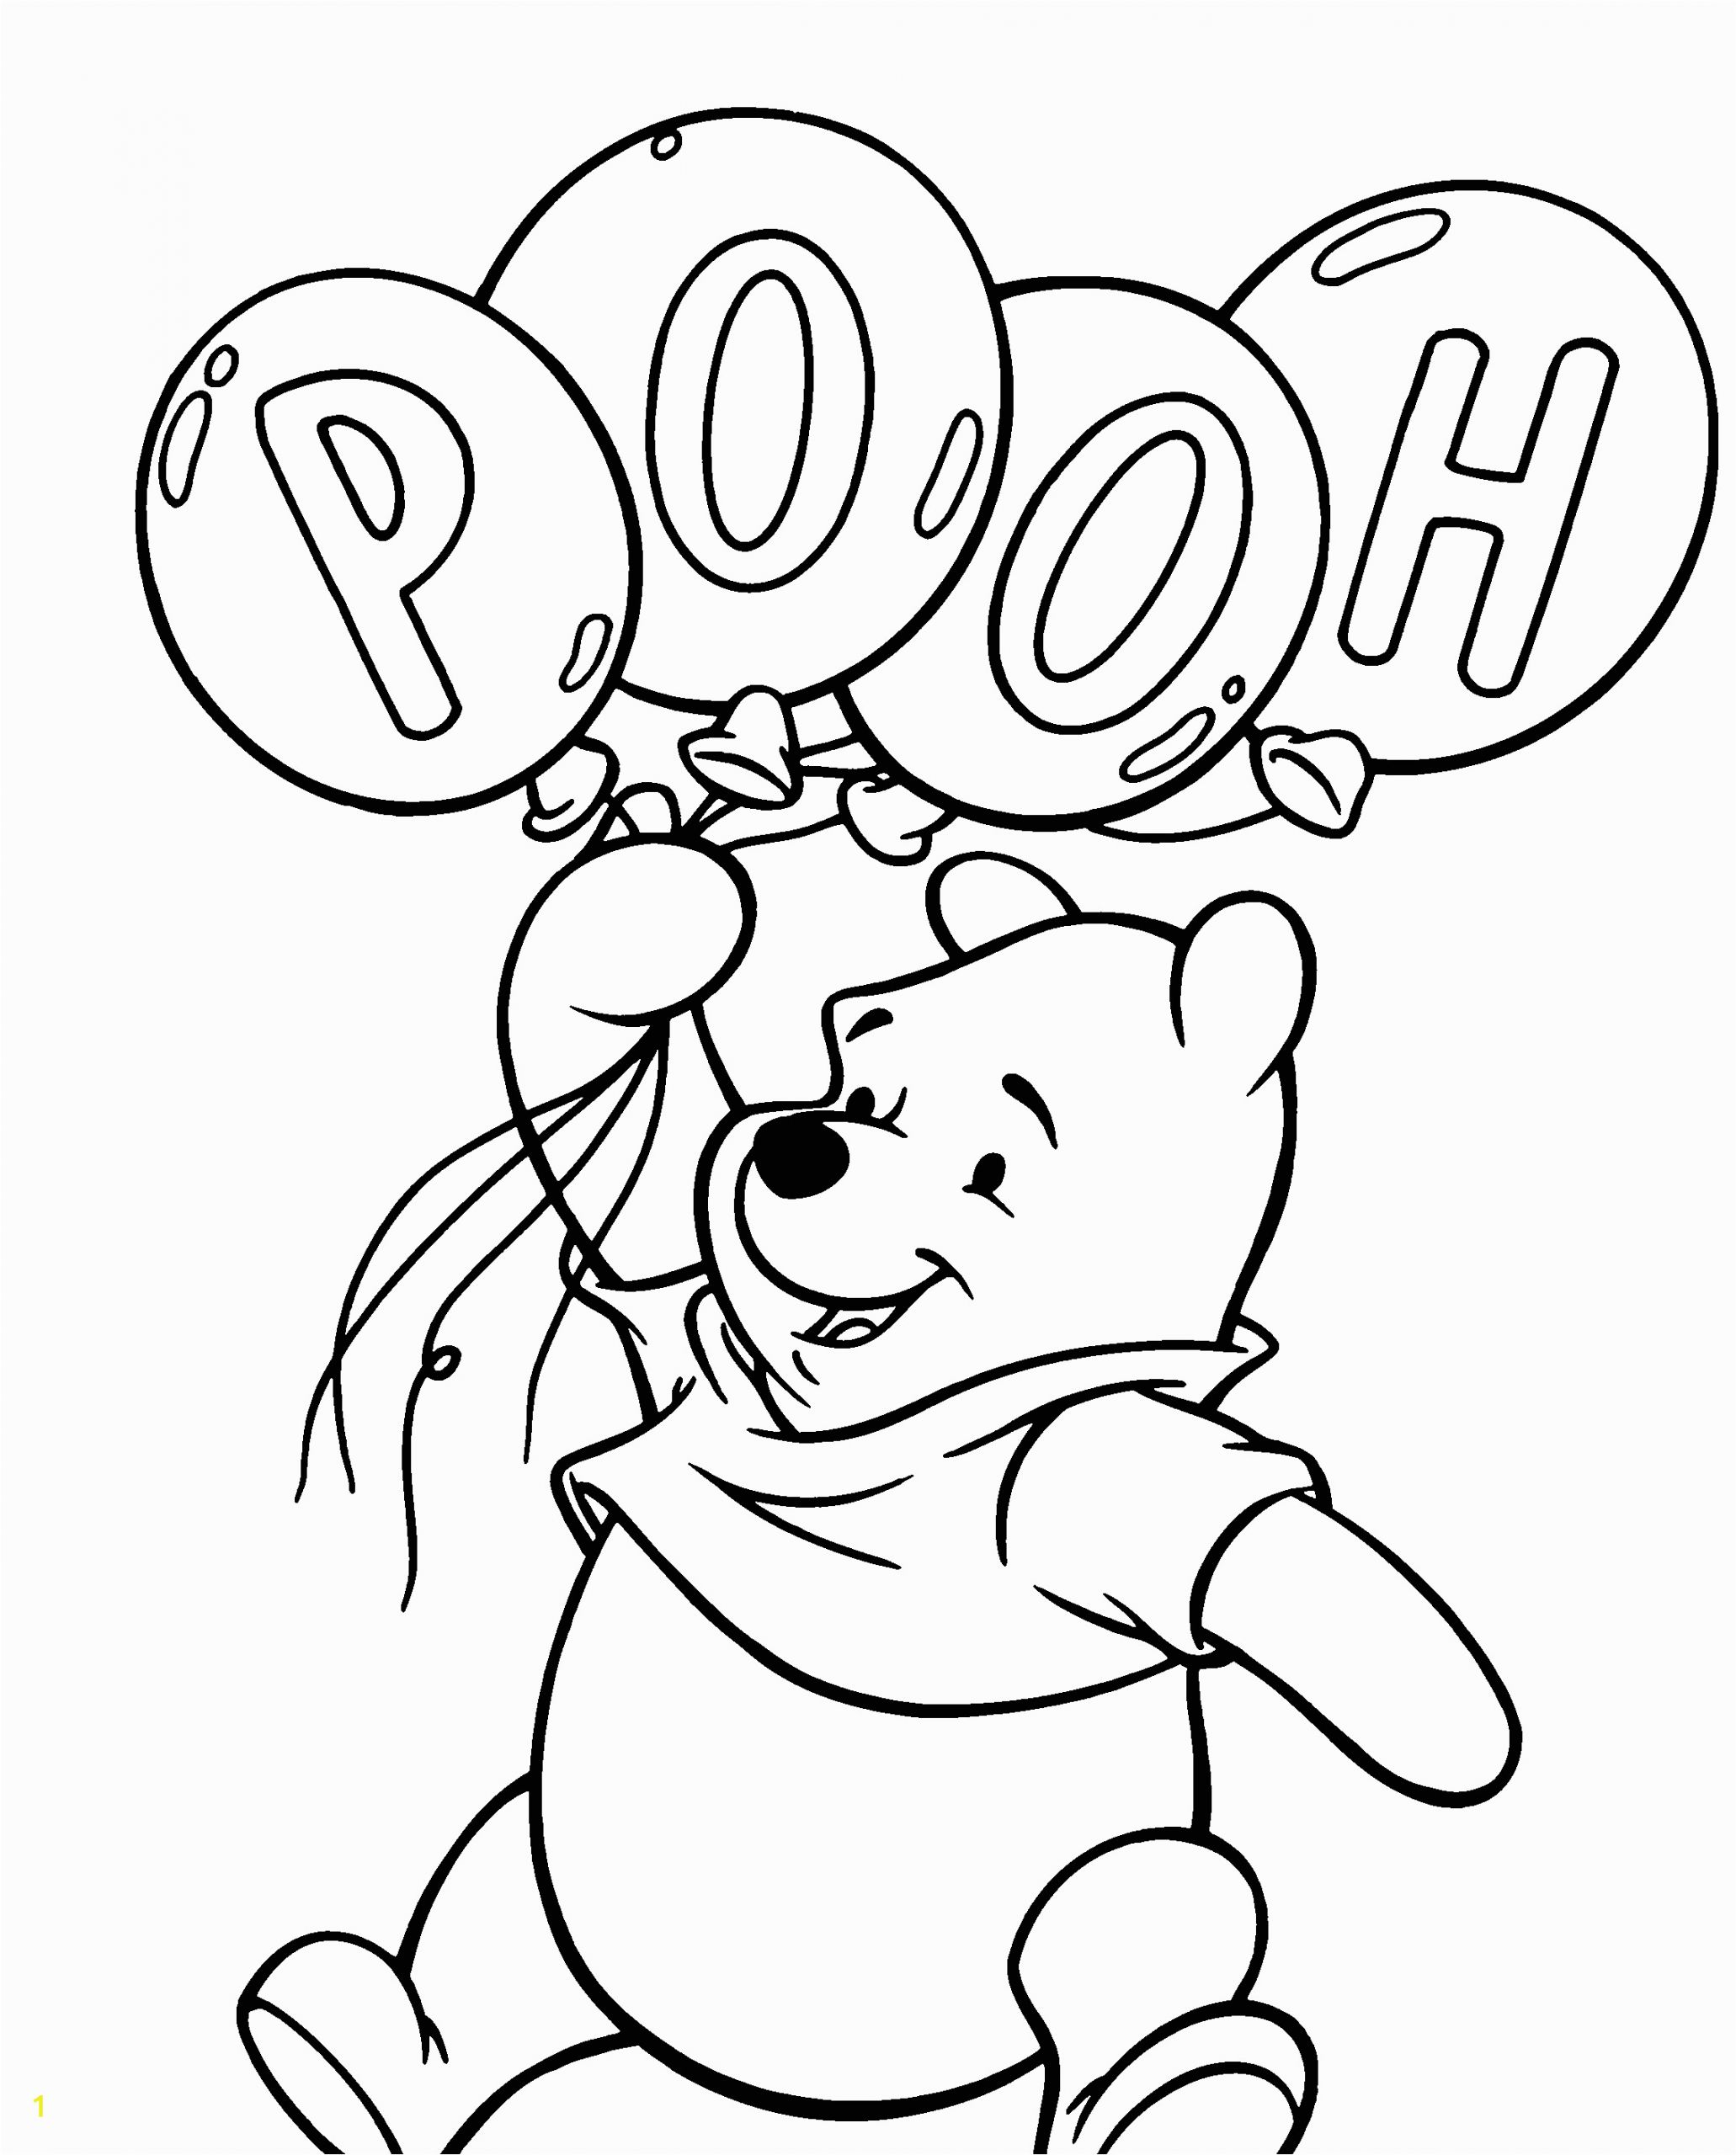 Winnie the Pooh Coloring Pages Free Coloring Free Winnie the Pooh Coloring Pages